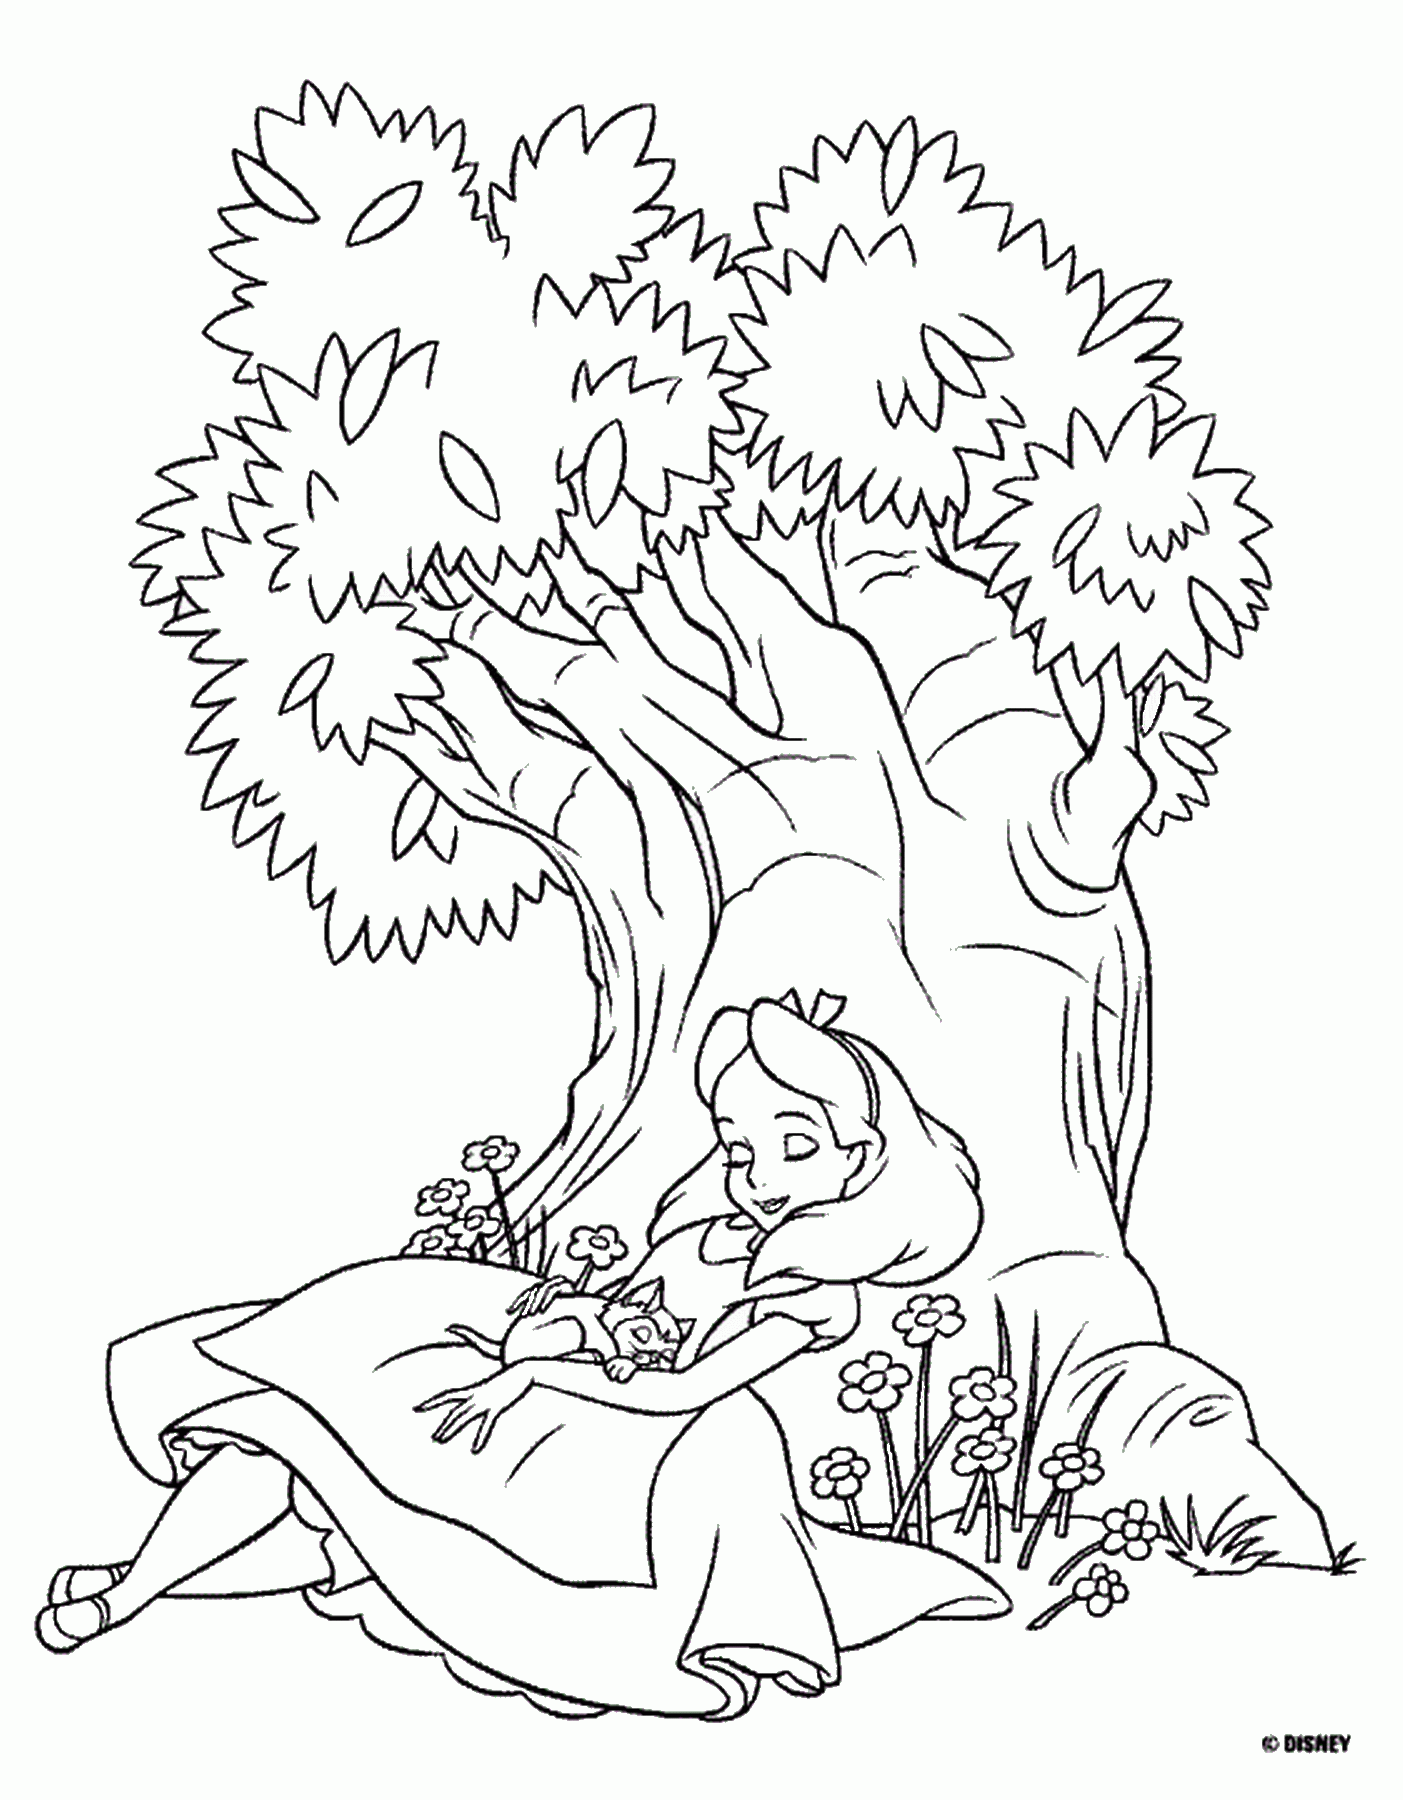 Alice in Wonderland Coloring Pages Cartoons alice_56 Printable 2020 0361 Coloring4free